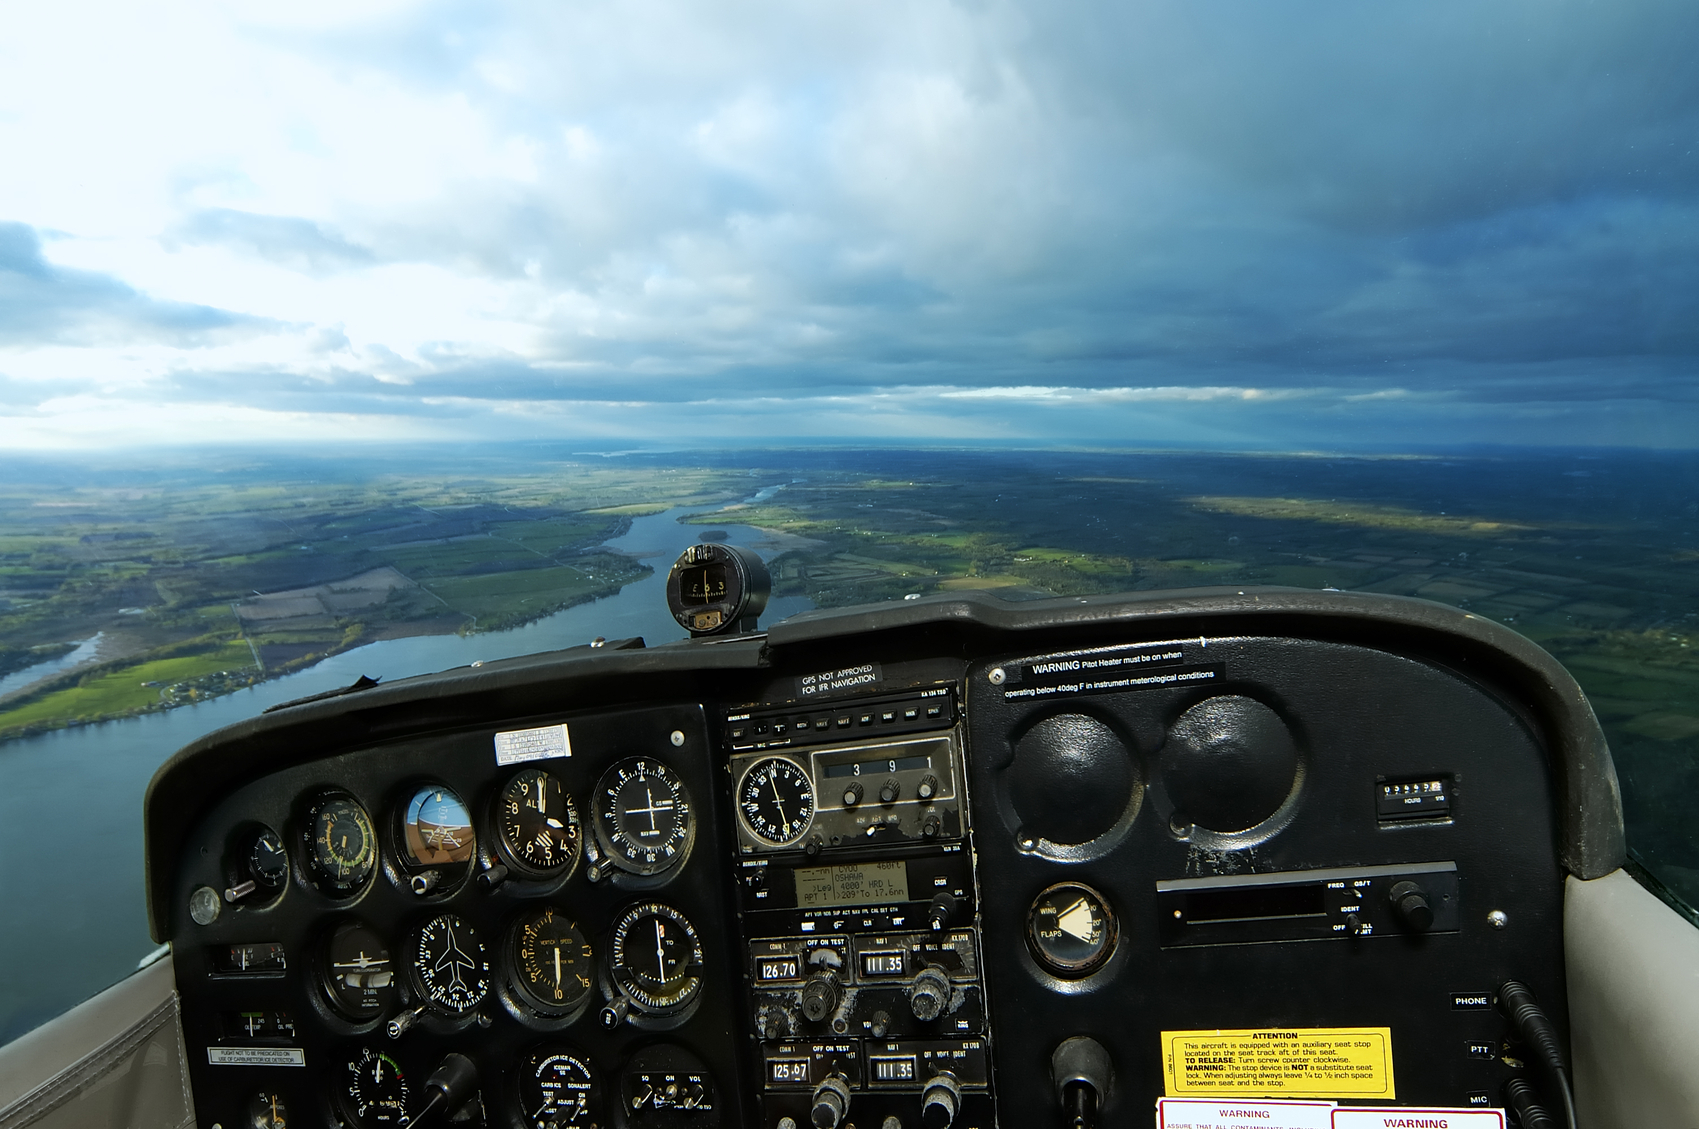 View from beyond the control panel of a cessna airplane with no roof or side windows in the frame to achieve an open canopy effect.  All text is generic warning notes and instrument readings. Clipping path for control panel embedded.